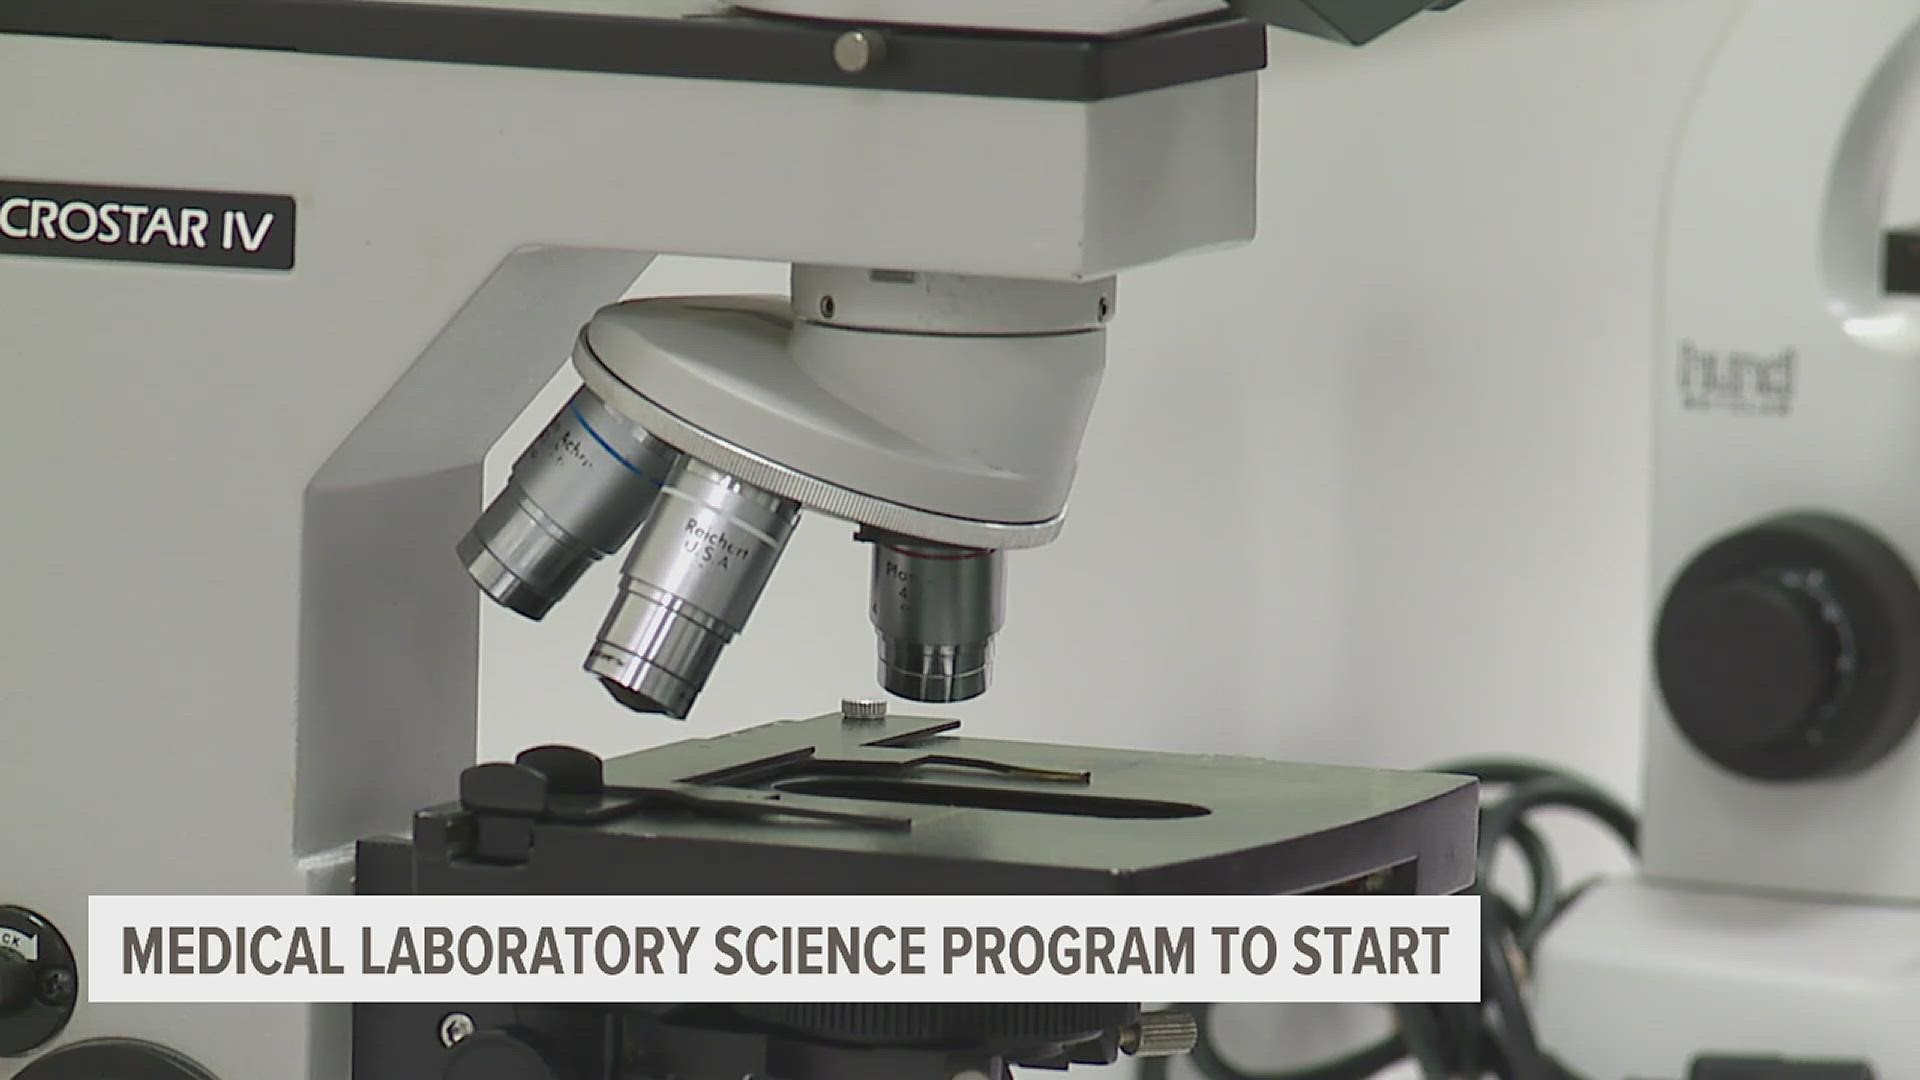 The college's Medical Laboratory Sciences Director said it will be the only program of its kind within a 90 mile radius.